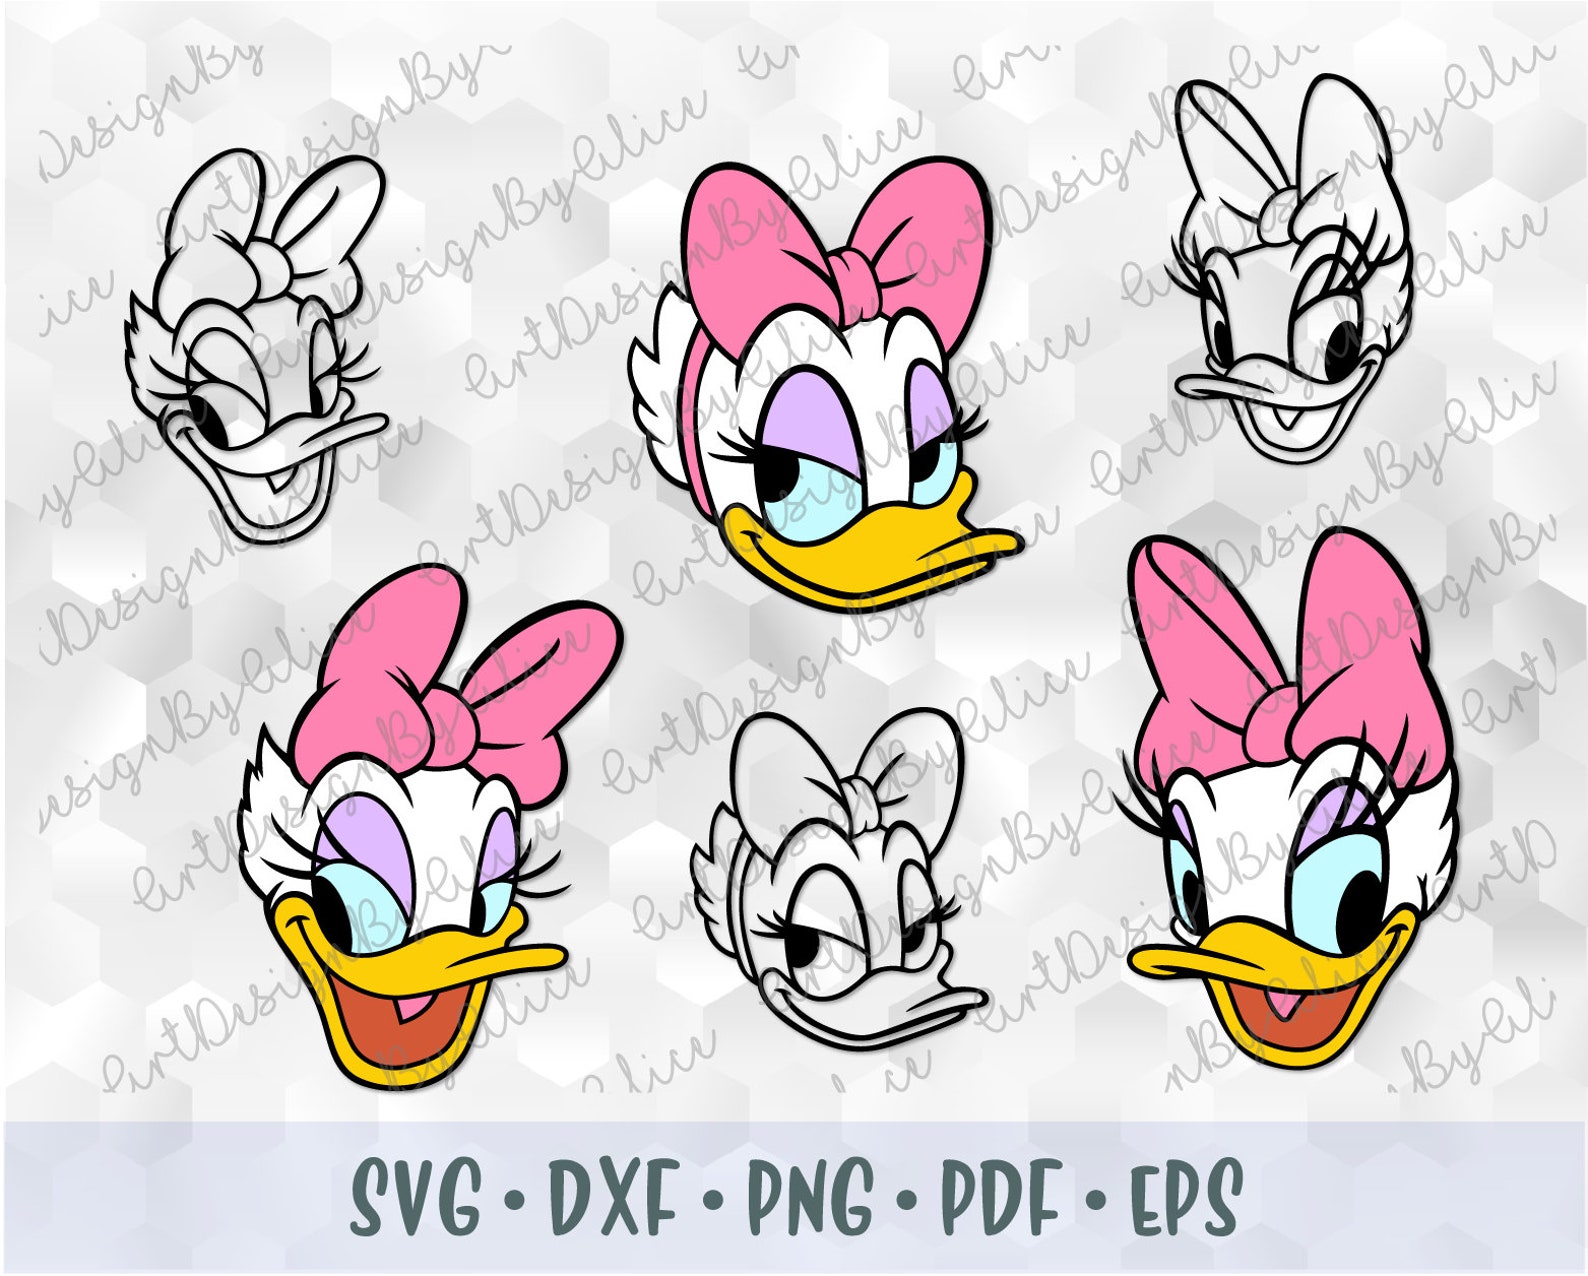 SVG PNG Daisy Duck Head Face Mickey Minnie Friends Layered Cut | Etsy